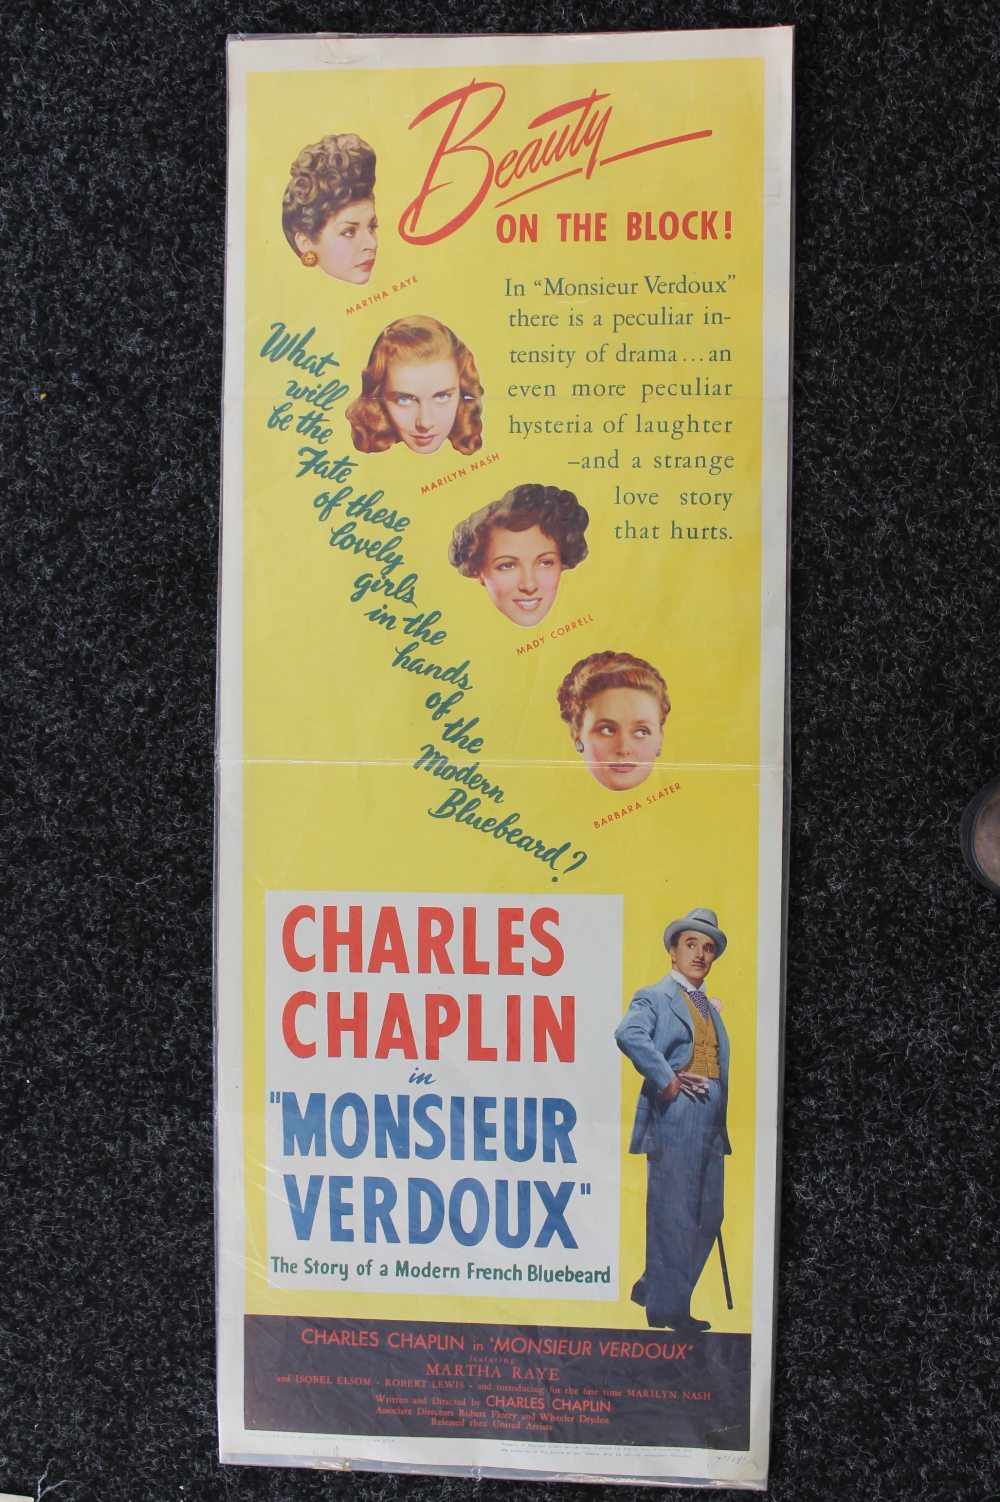 CHARLIE CHAPLIN - a collection of 4 Charlie Chaplin inserts measuring 36" x 14". - Image 4 of 5